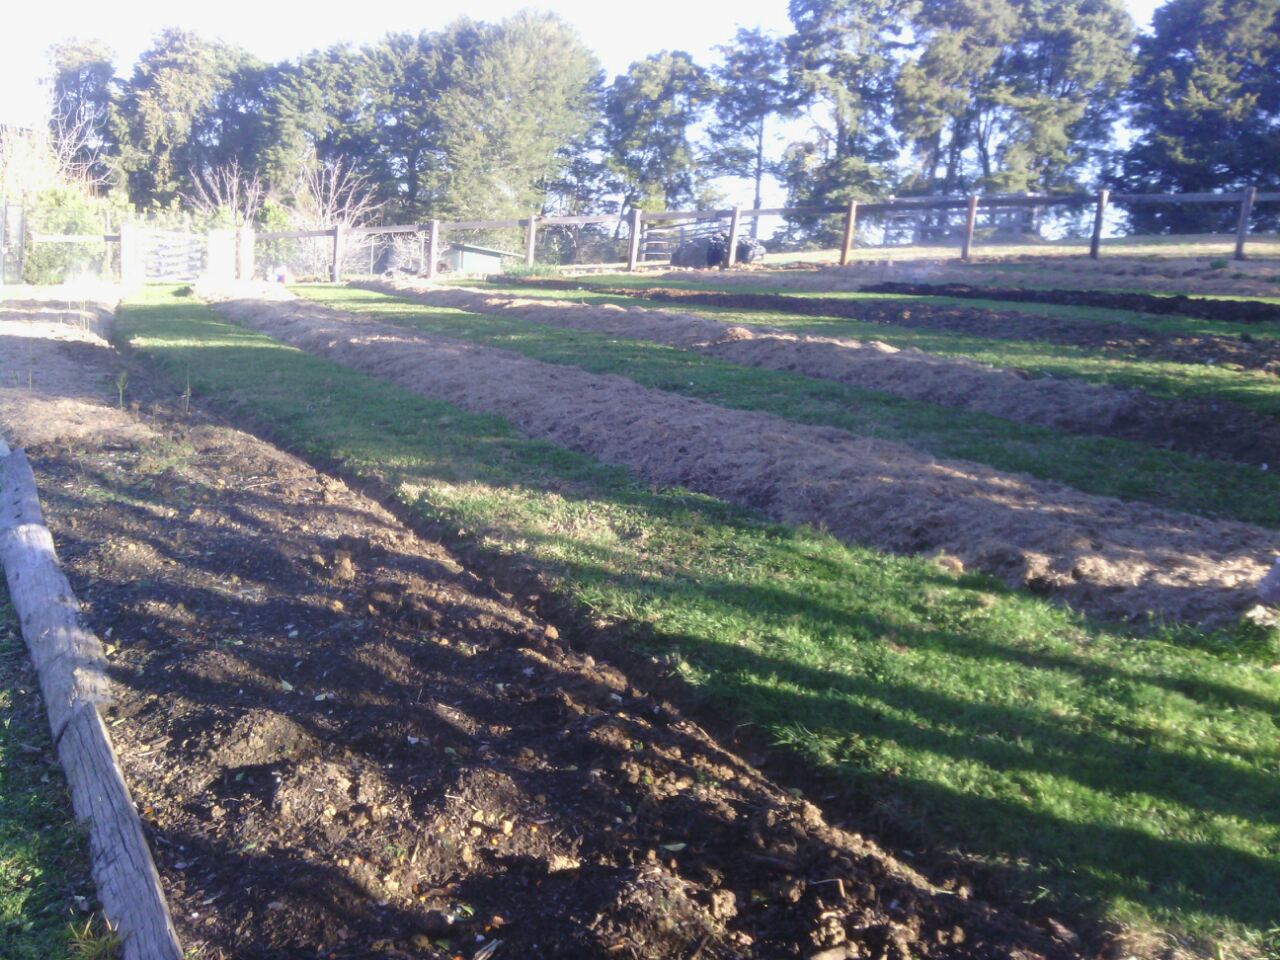 Establishing the asparagus beds above the orchard area.